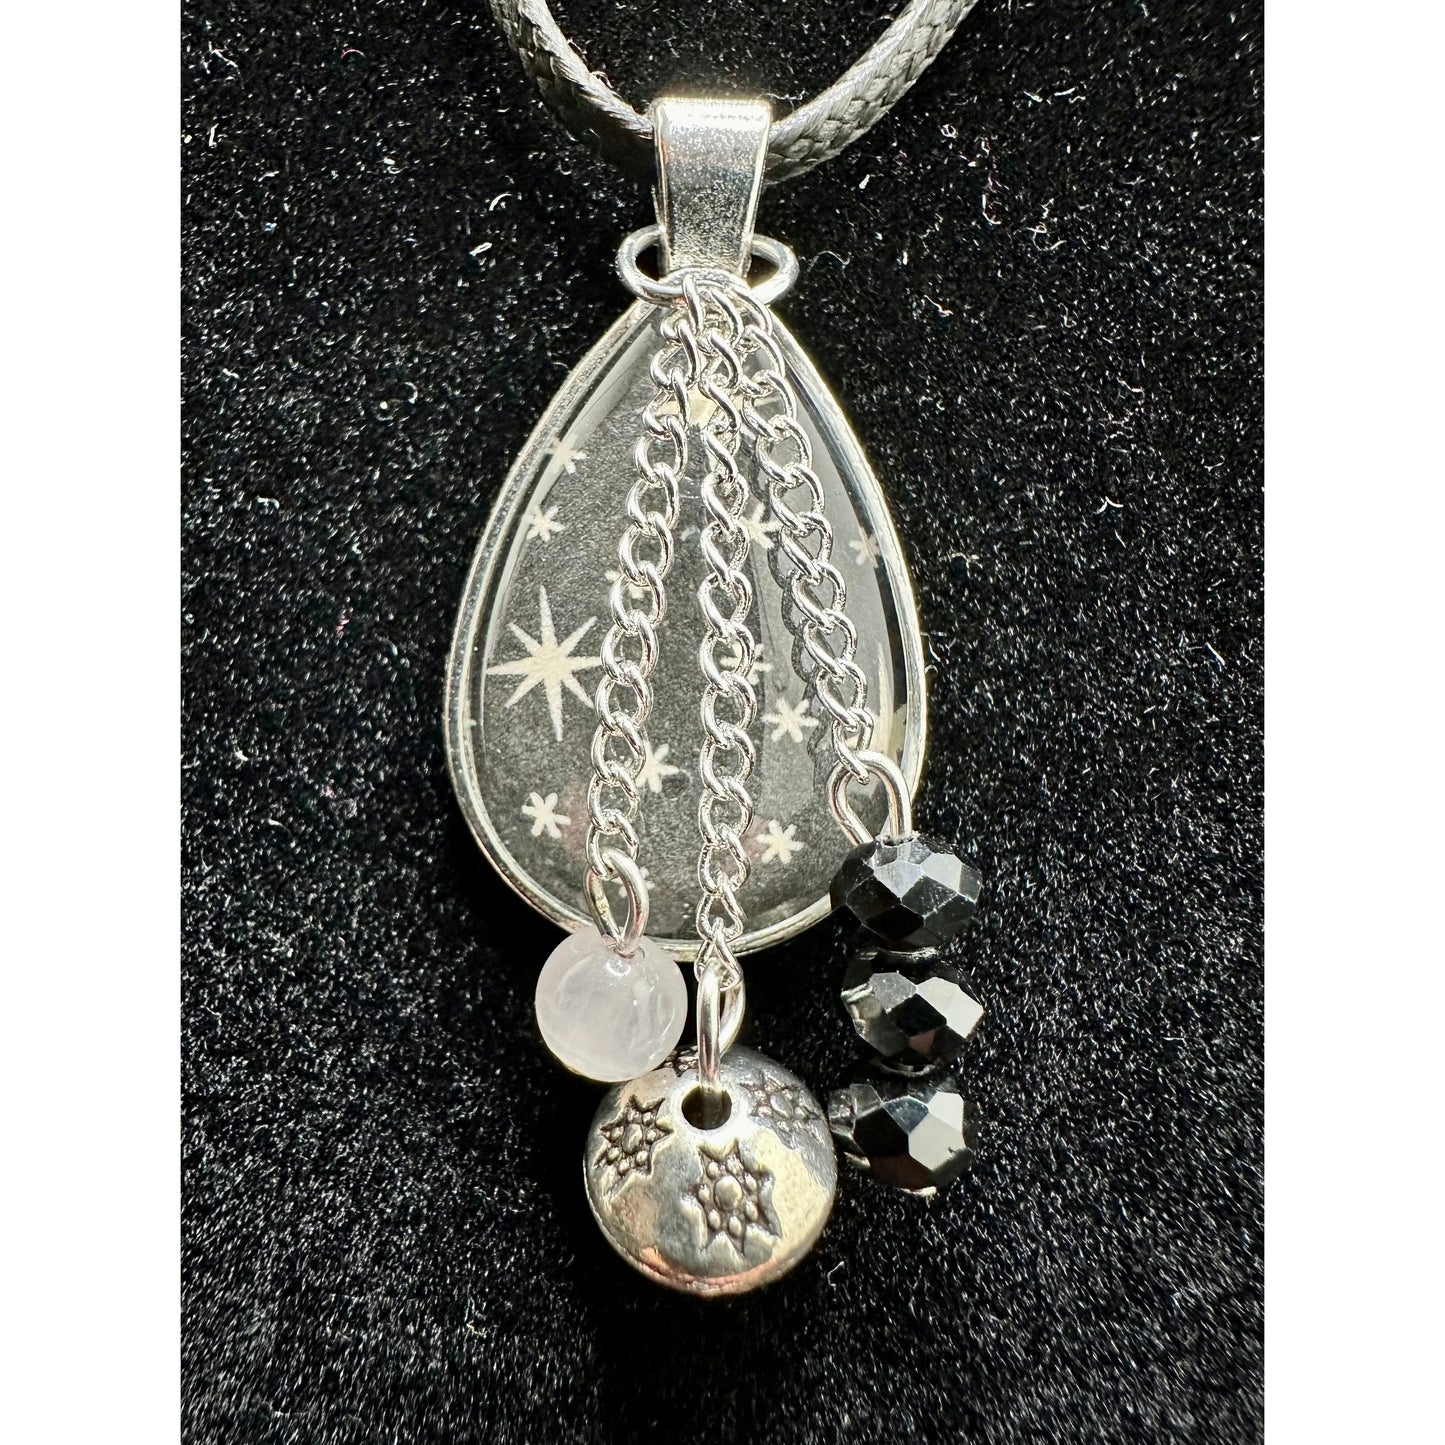 Dewdrop 12 Pendant Necklace - Rhapsody and Renascence